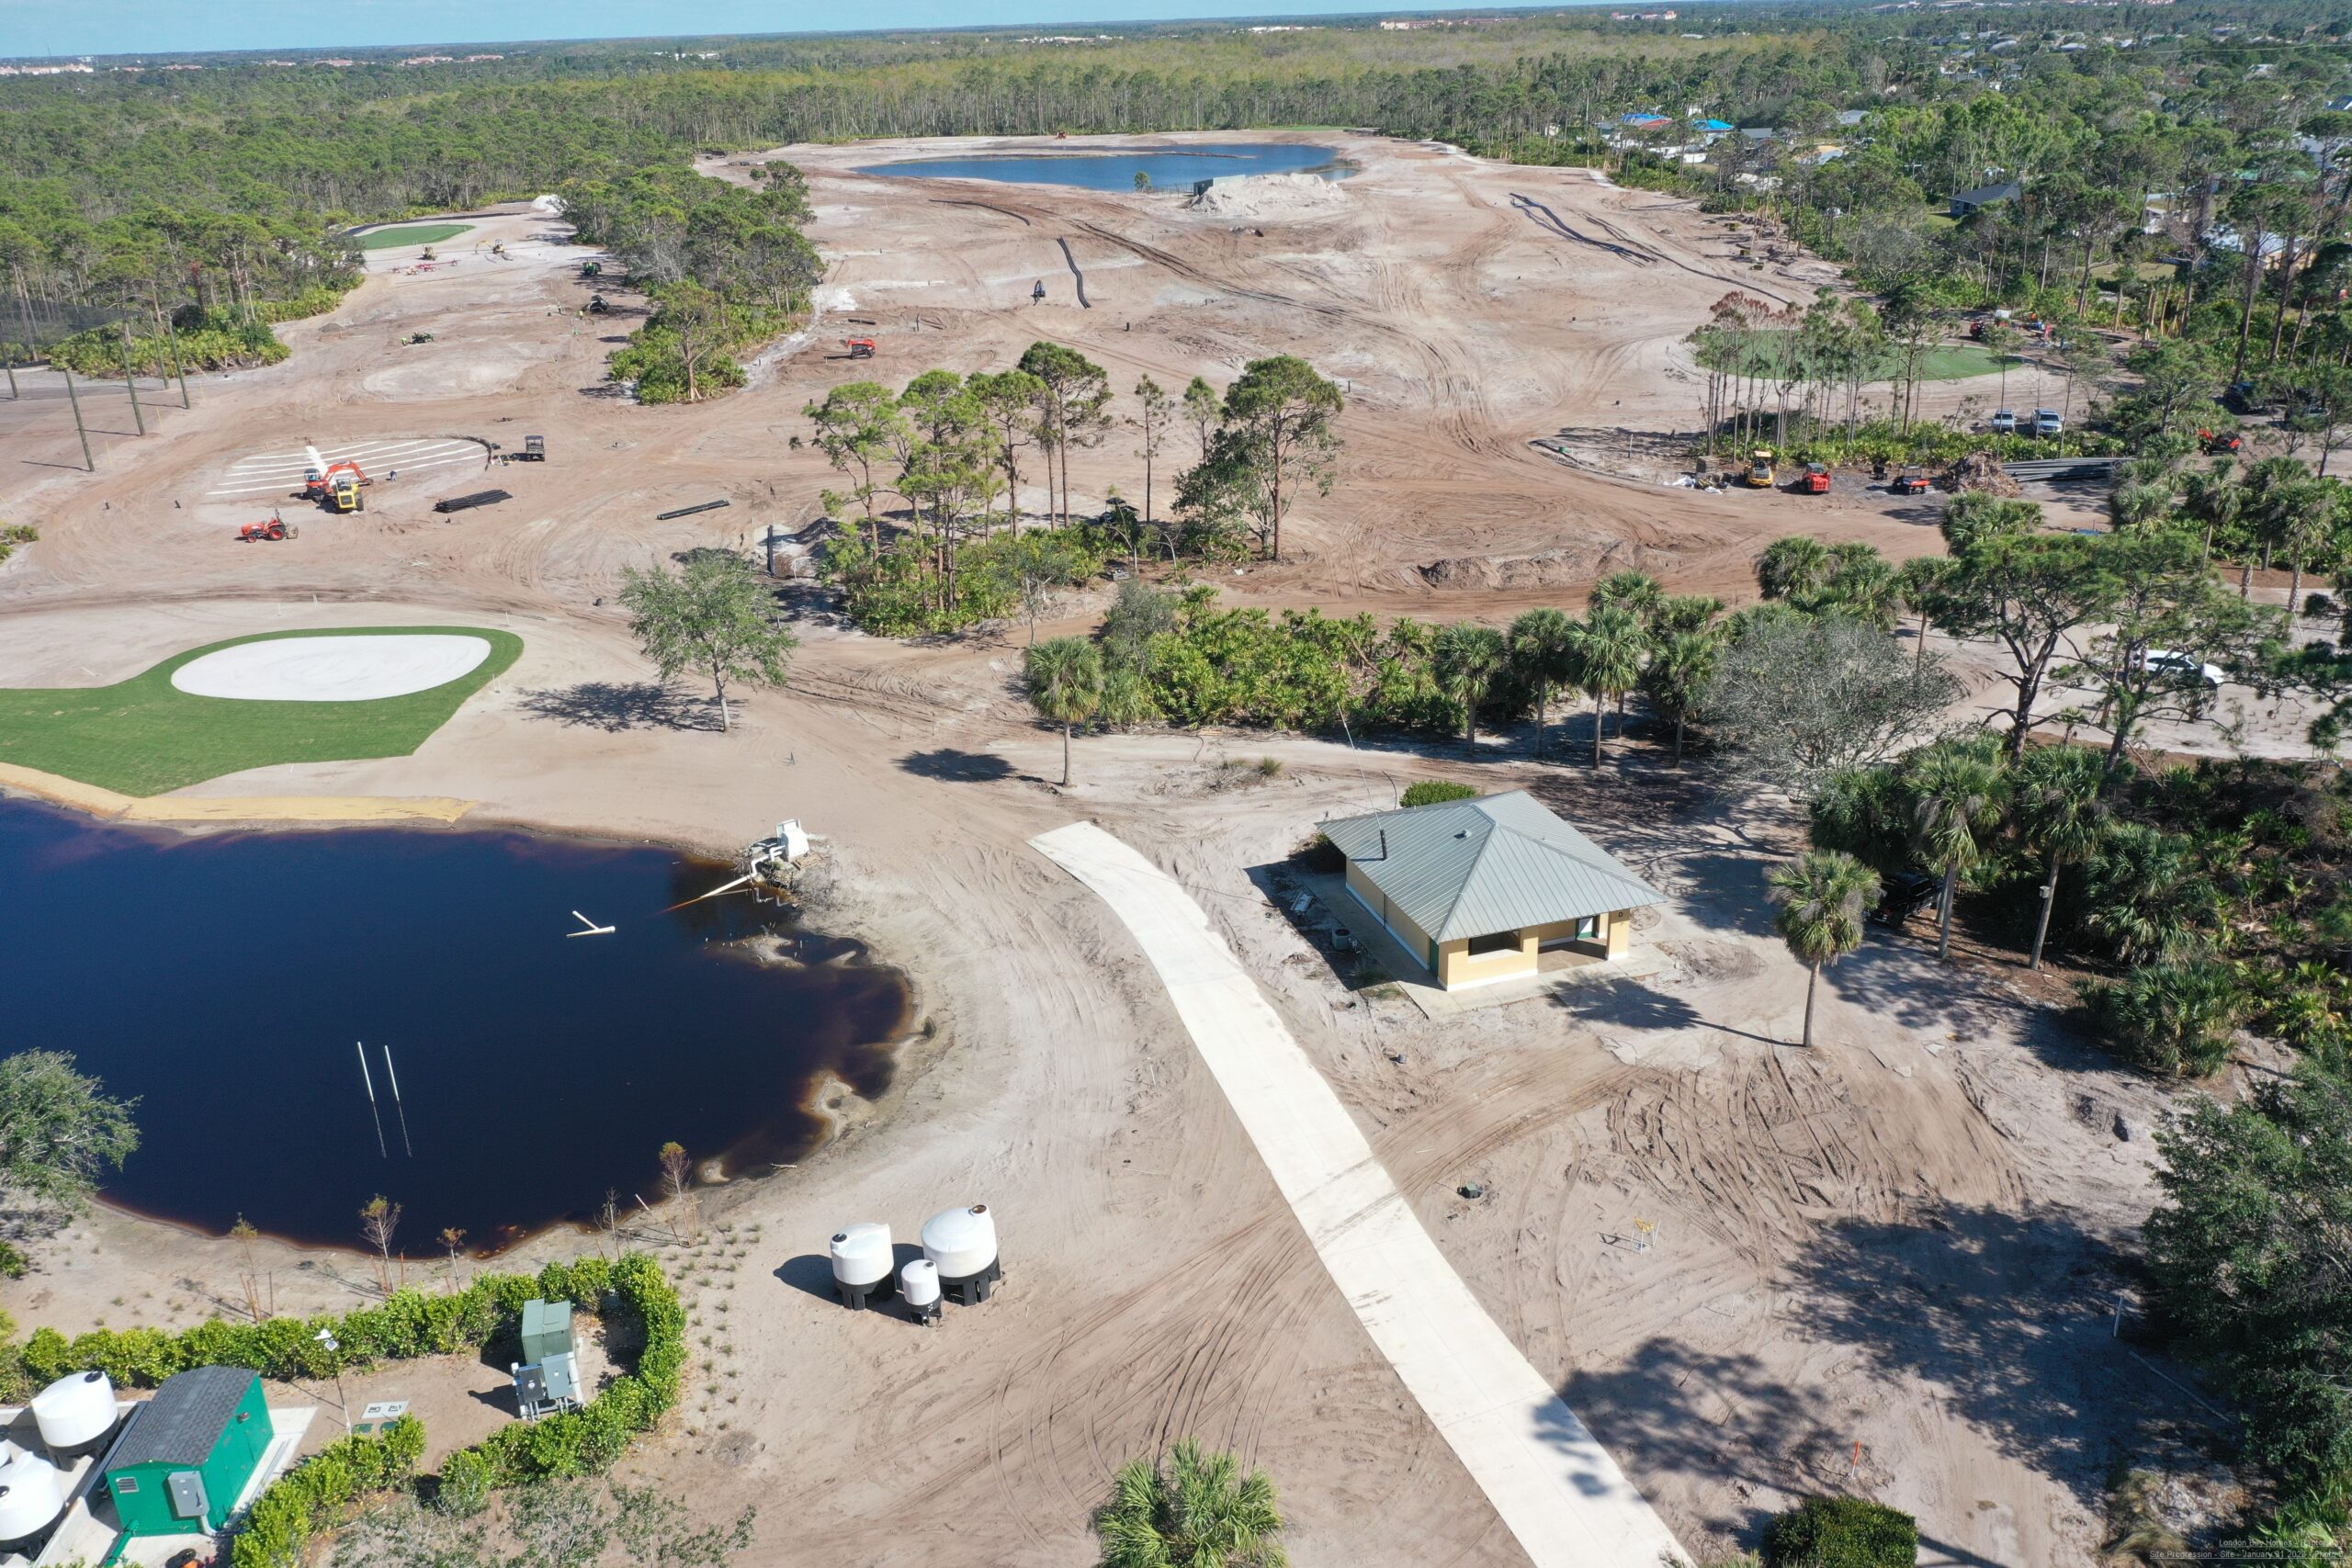 An aerial view of the Saltleaf Golf Preserve, a championship golf course currently under construction in Bonita Springs.